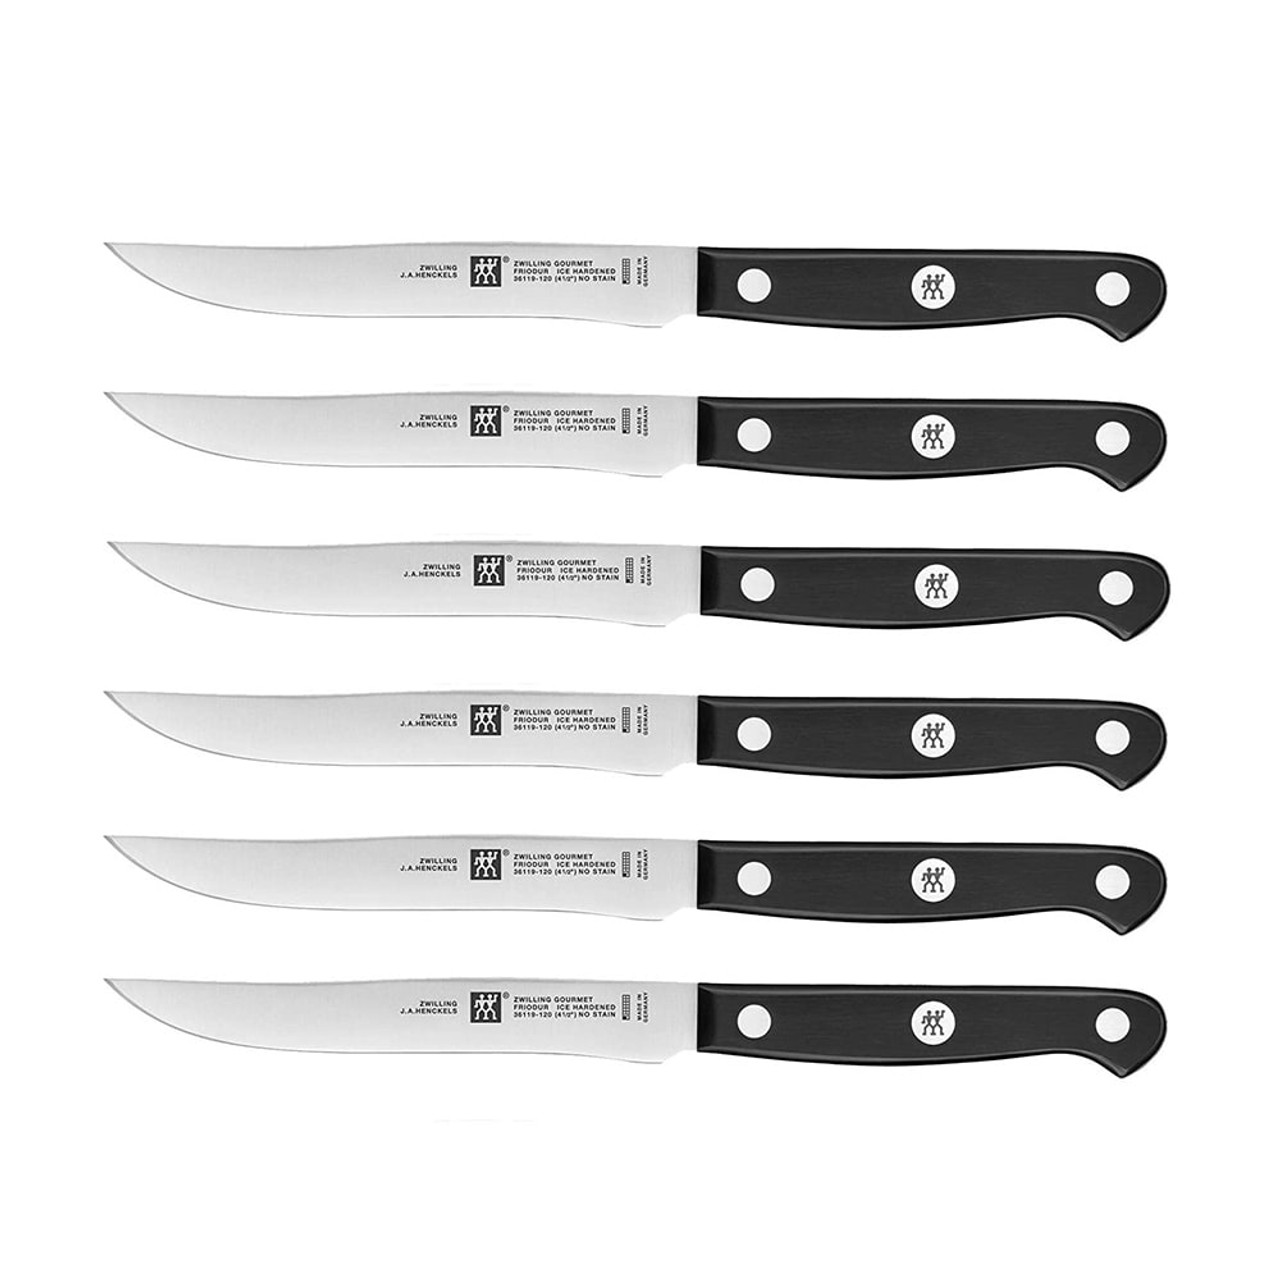 https://cdn11.bigcommerce.com/s-hccytny0od/images/stencil/1280x1280/products/2307/7730/zwilling-gourmet-6pc-steak-knife-set__49888.1550140378.jpg?c=2?imbypass=on